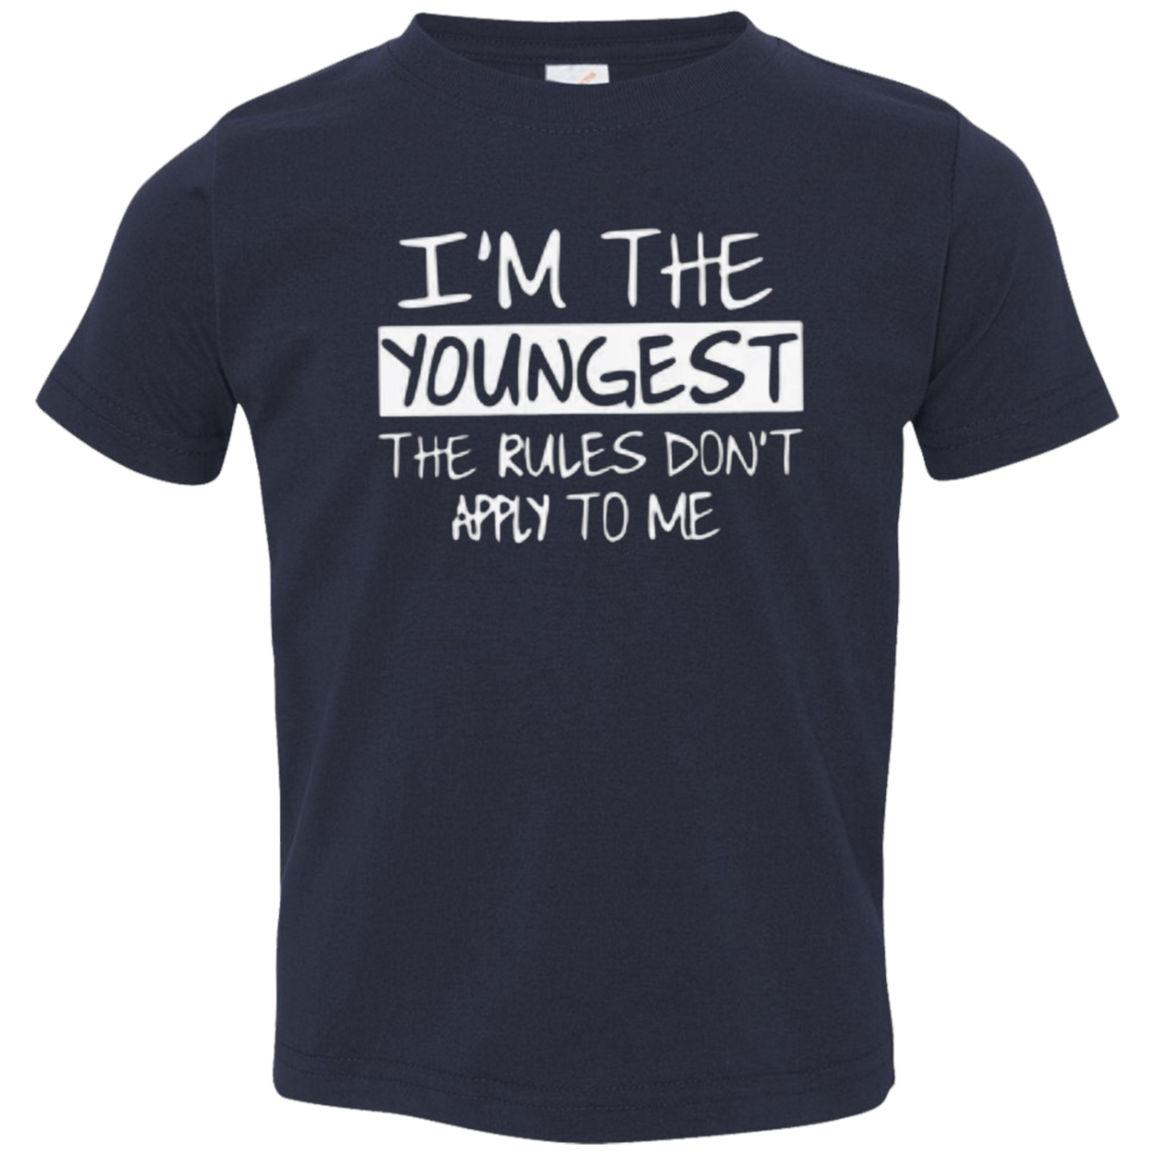 I'm the youngest! Tee